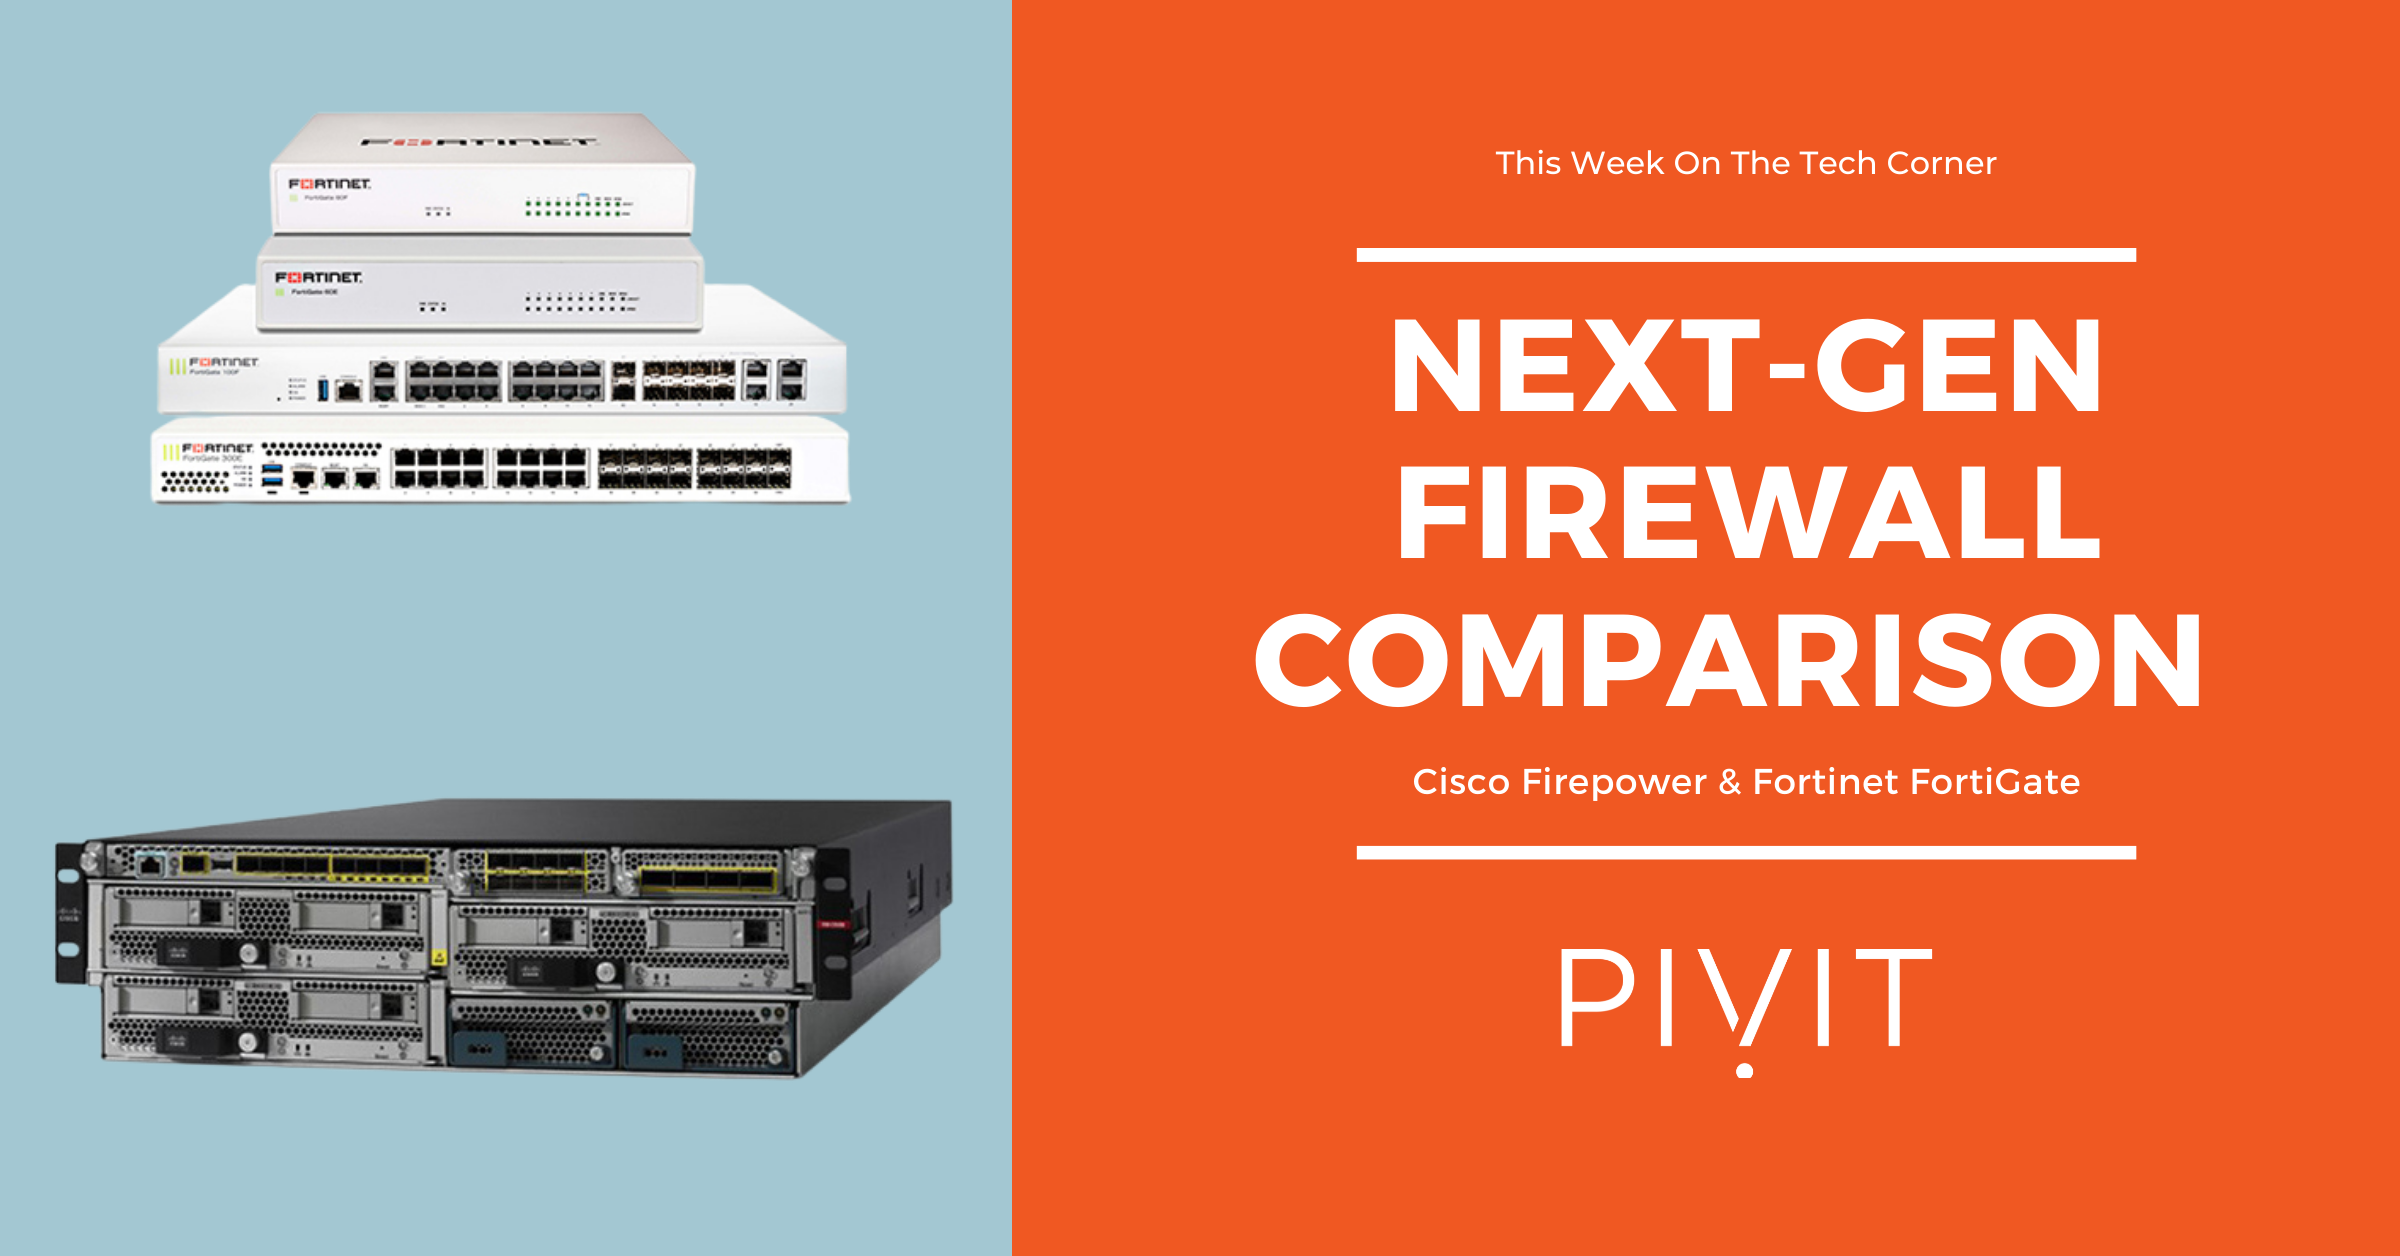 Cisco Firepower and Fortinet FortiGate next-generation firewall comparison images